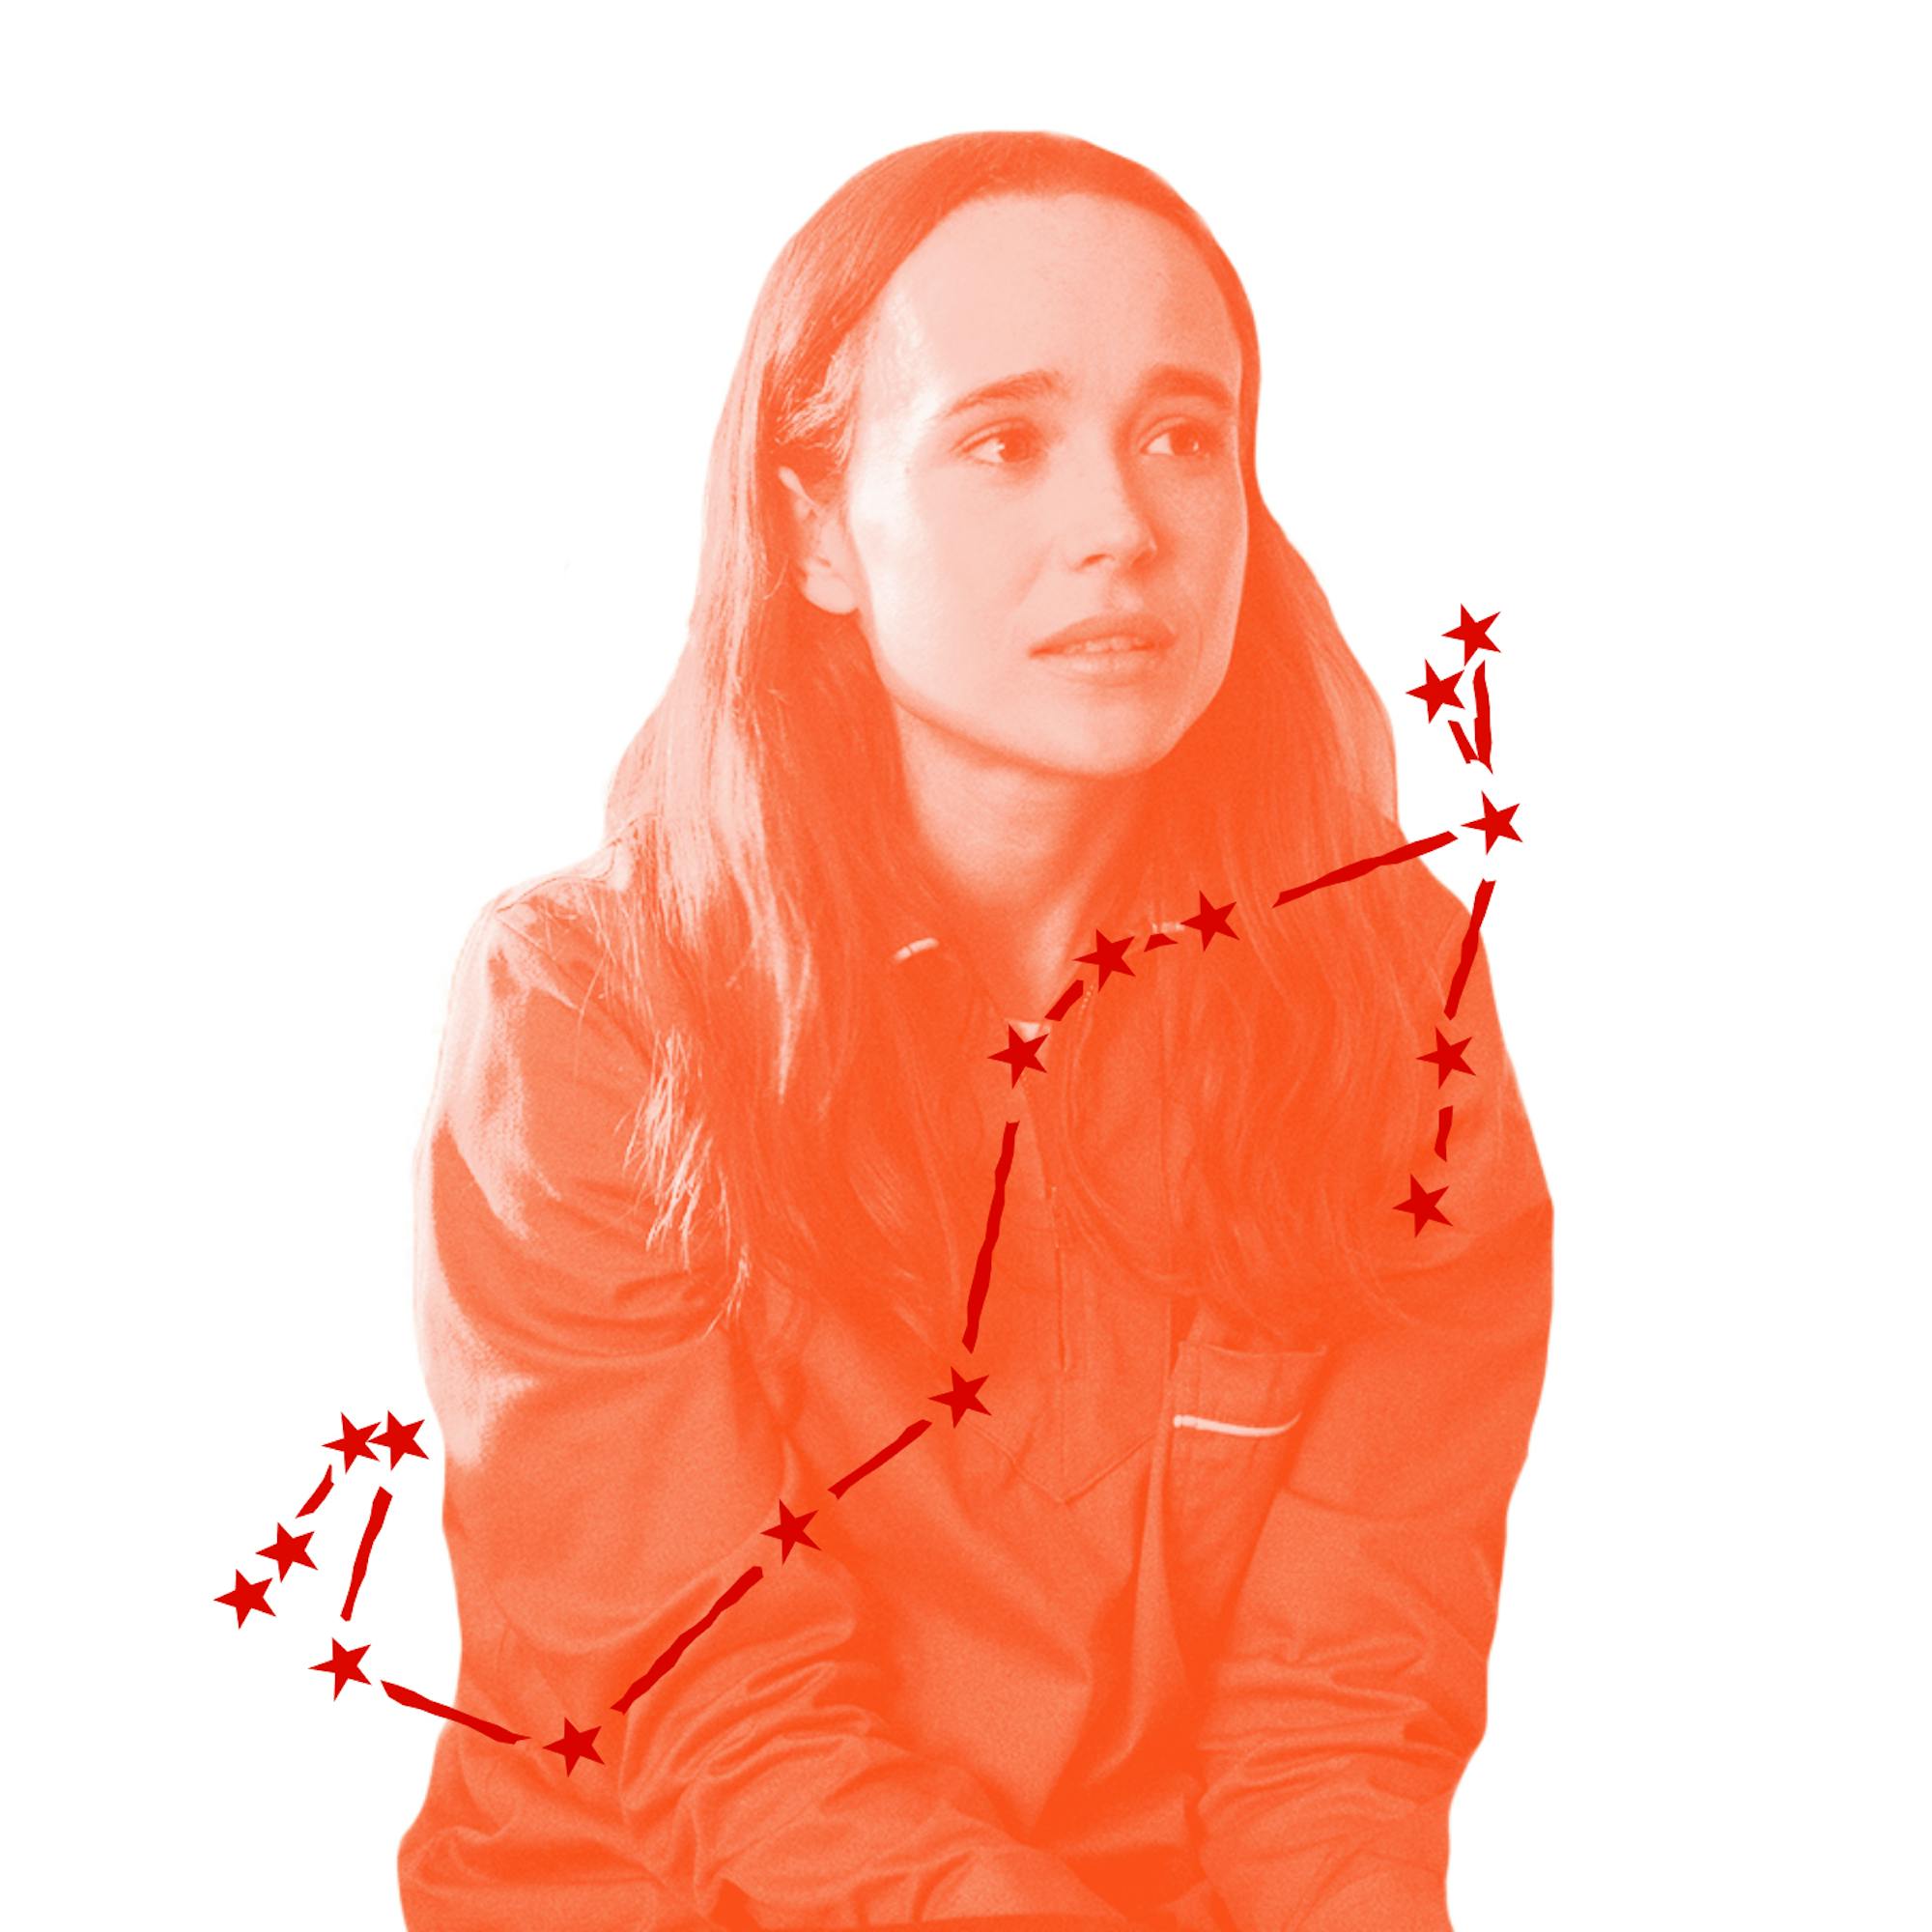 Vanya Hargreeves (played by Elliot Page) looks like she has all the feelings and secrets worthy of a Scorpio rising in this still from The Umbrella Academy. Over the image is an illustration of Vanya’s zodiac constellation.